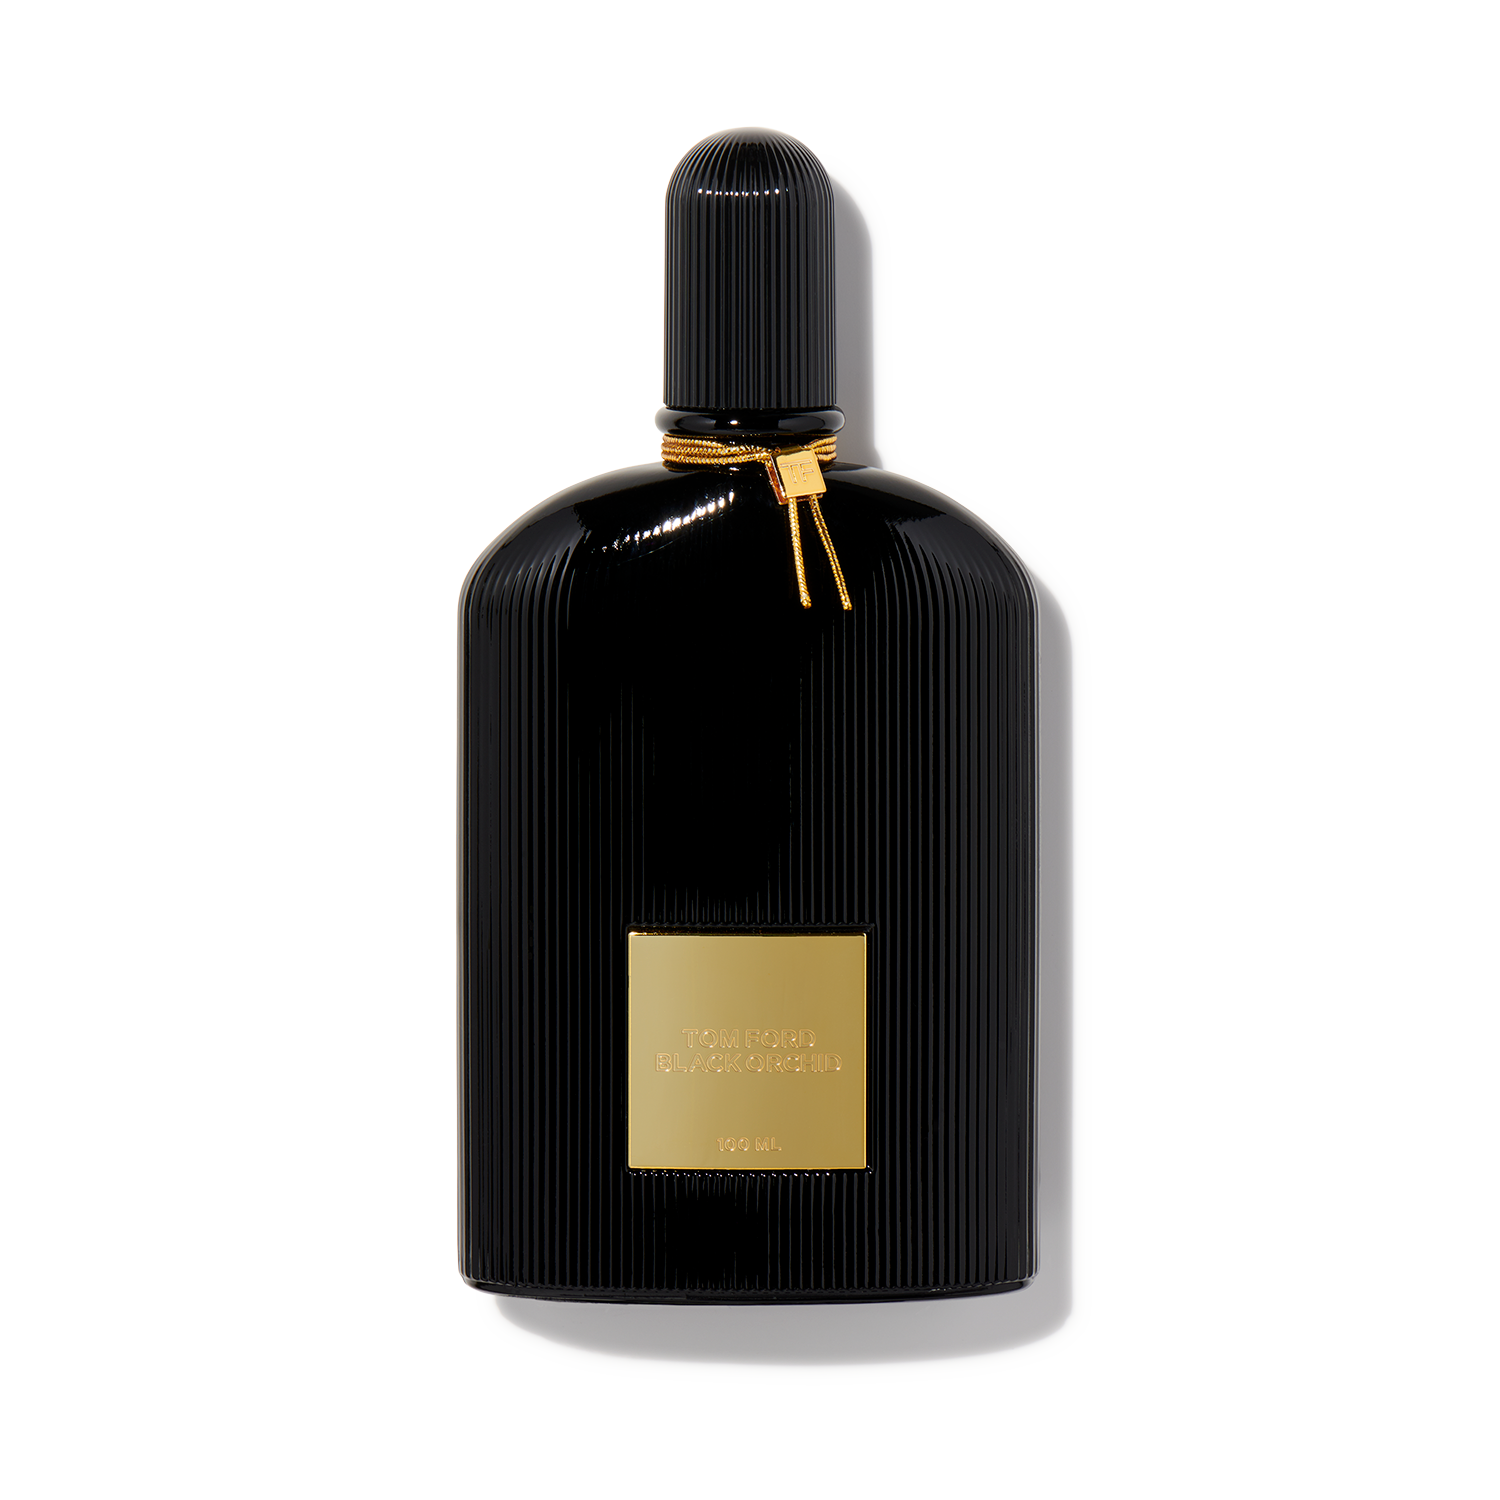 Top 54+ imagen famous tom ford perfume - Abzlocal.mx